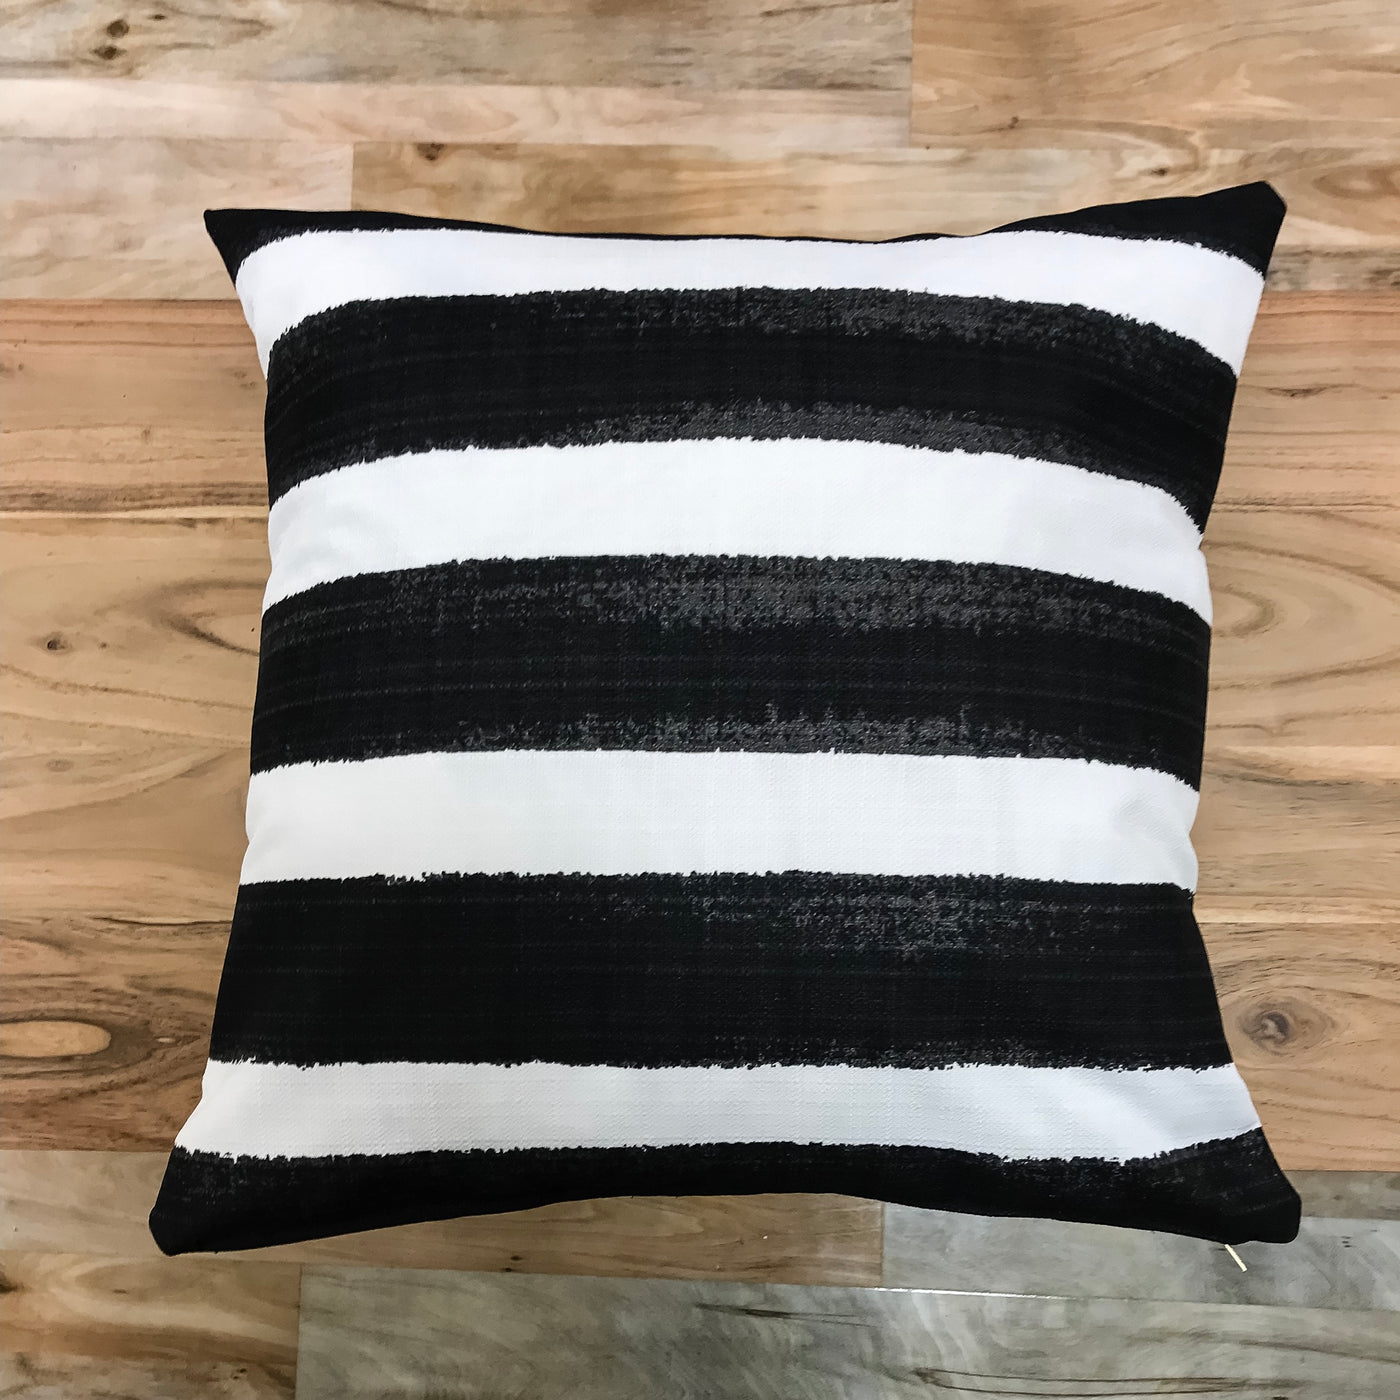 Classic black and white outdoor pillows - ACE - Studio Pillows